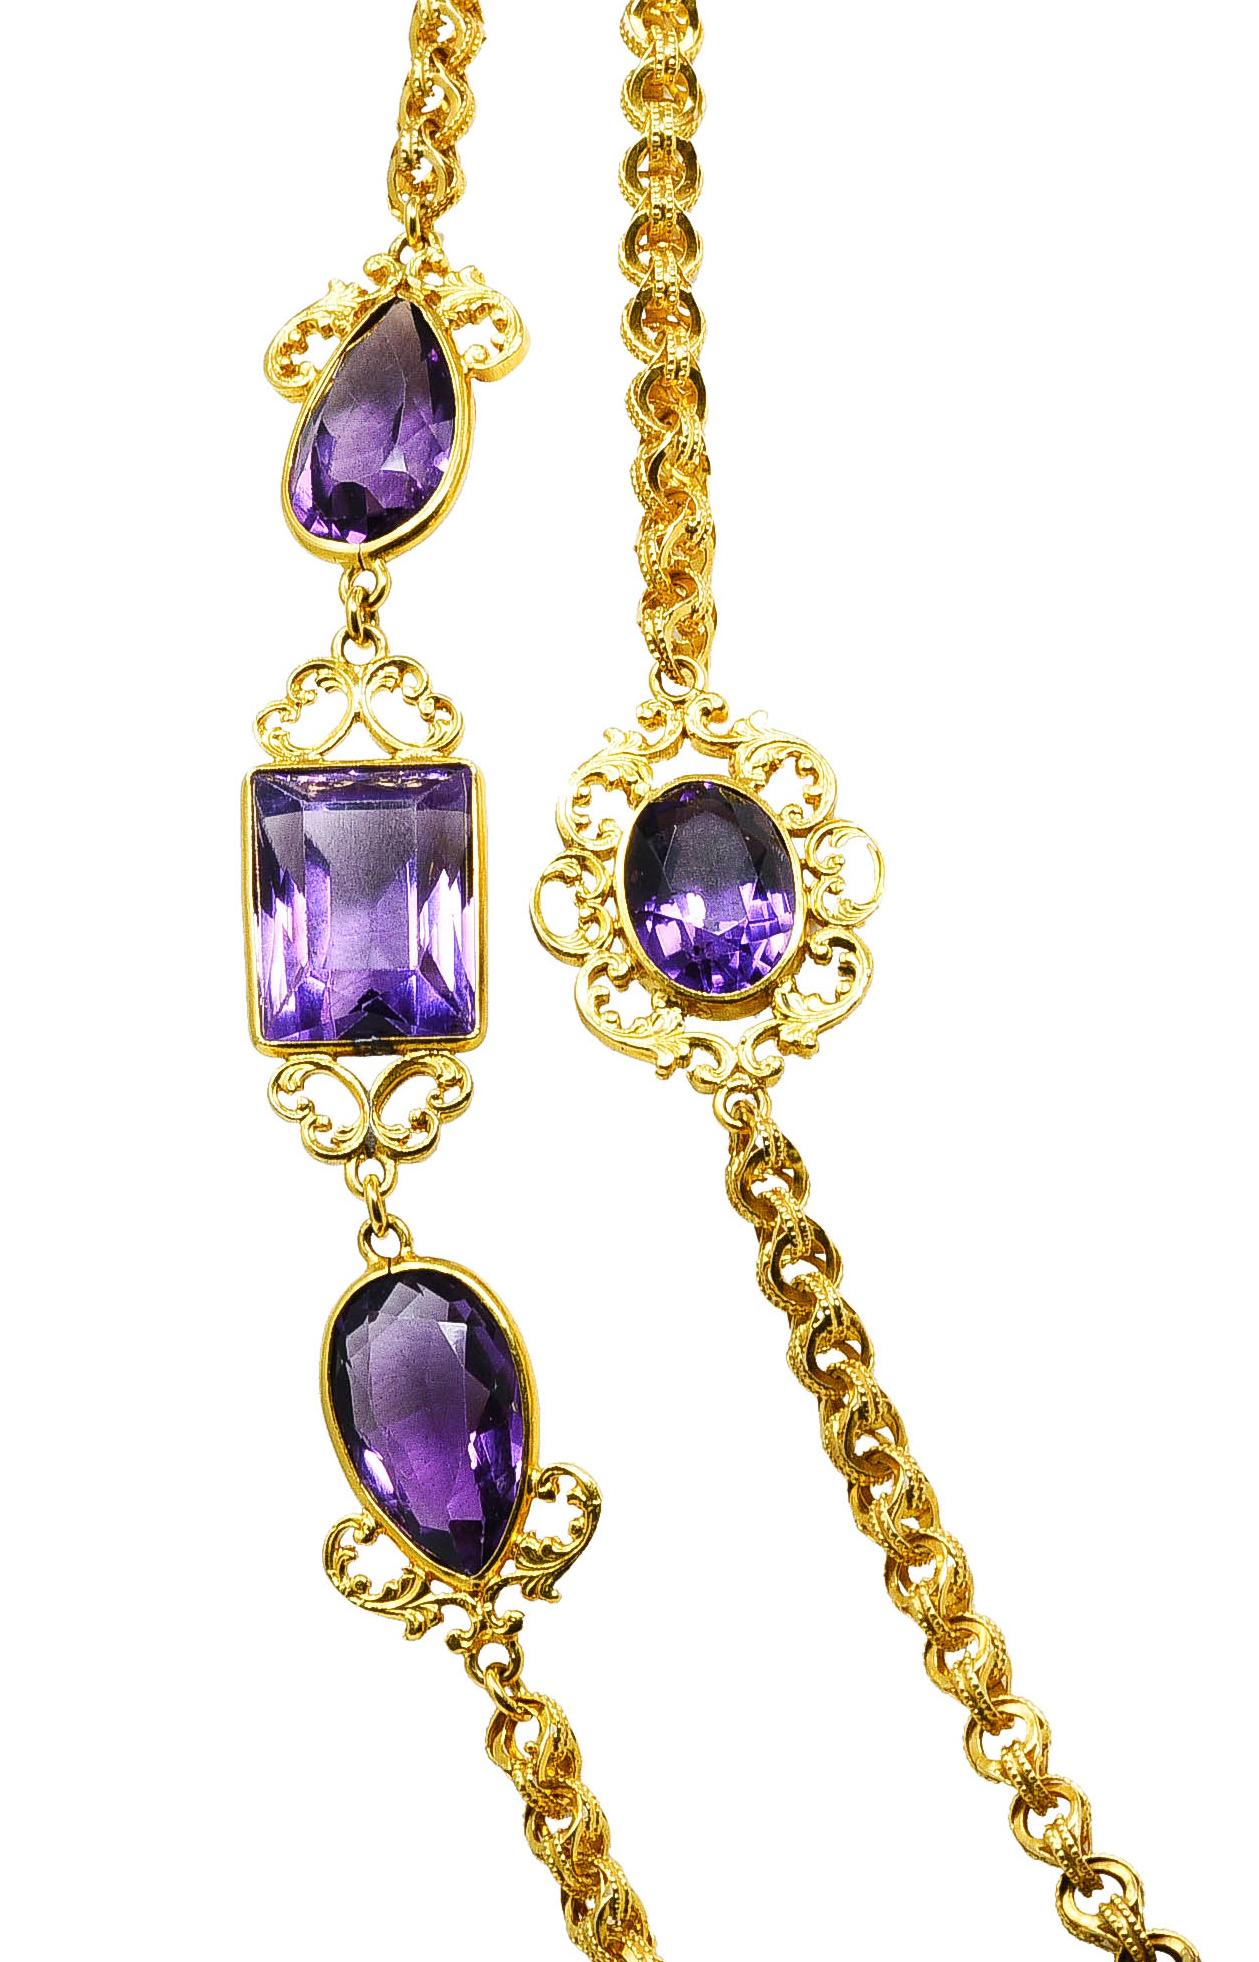 Victorian Amethyst 14 Karat Yellow Gold Long Scrolling Fob Station Chain Antique 2